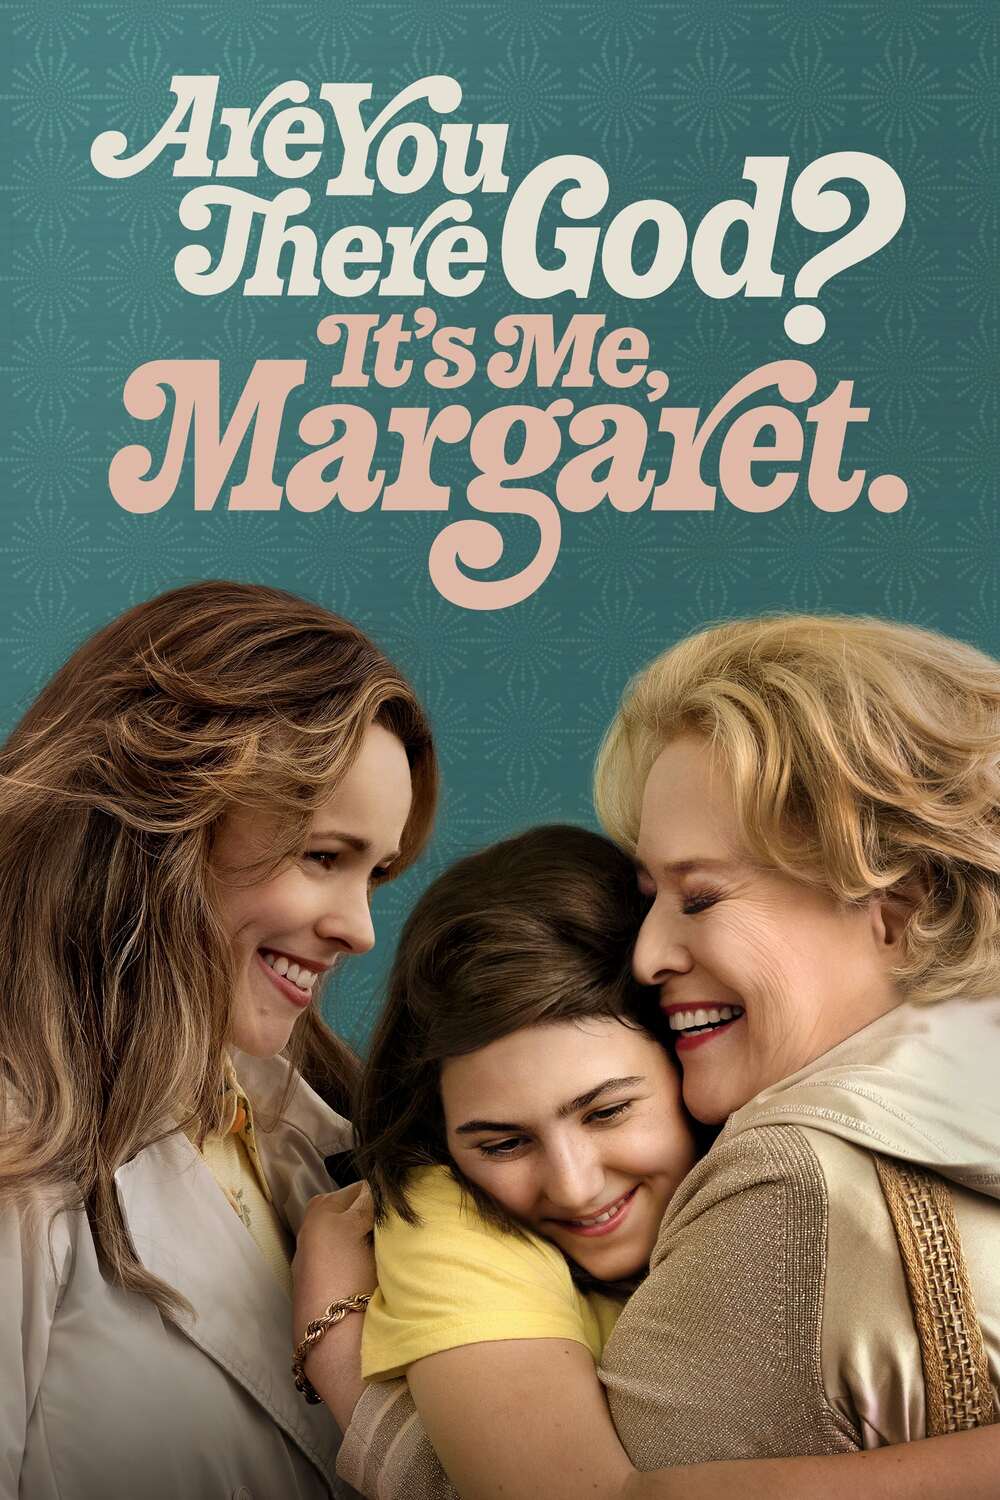 christian movie reviews are you there god it's me margaret